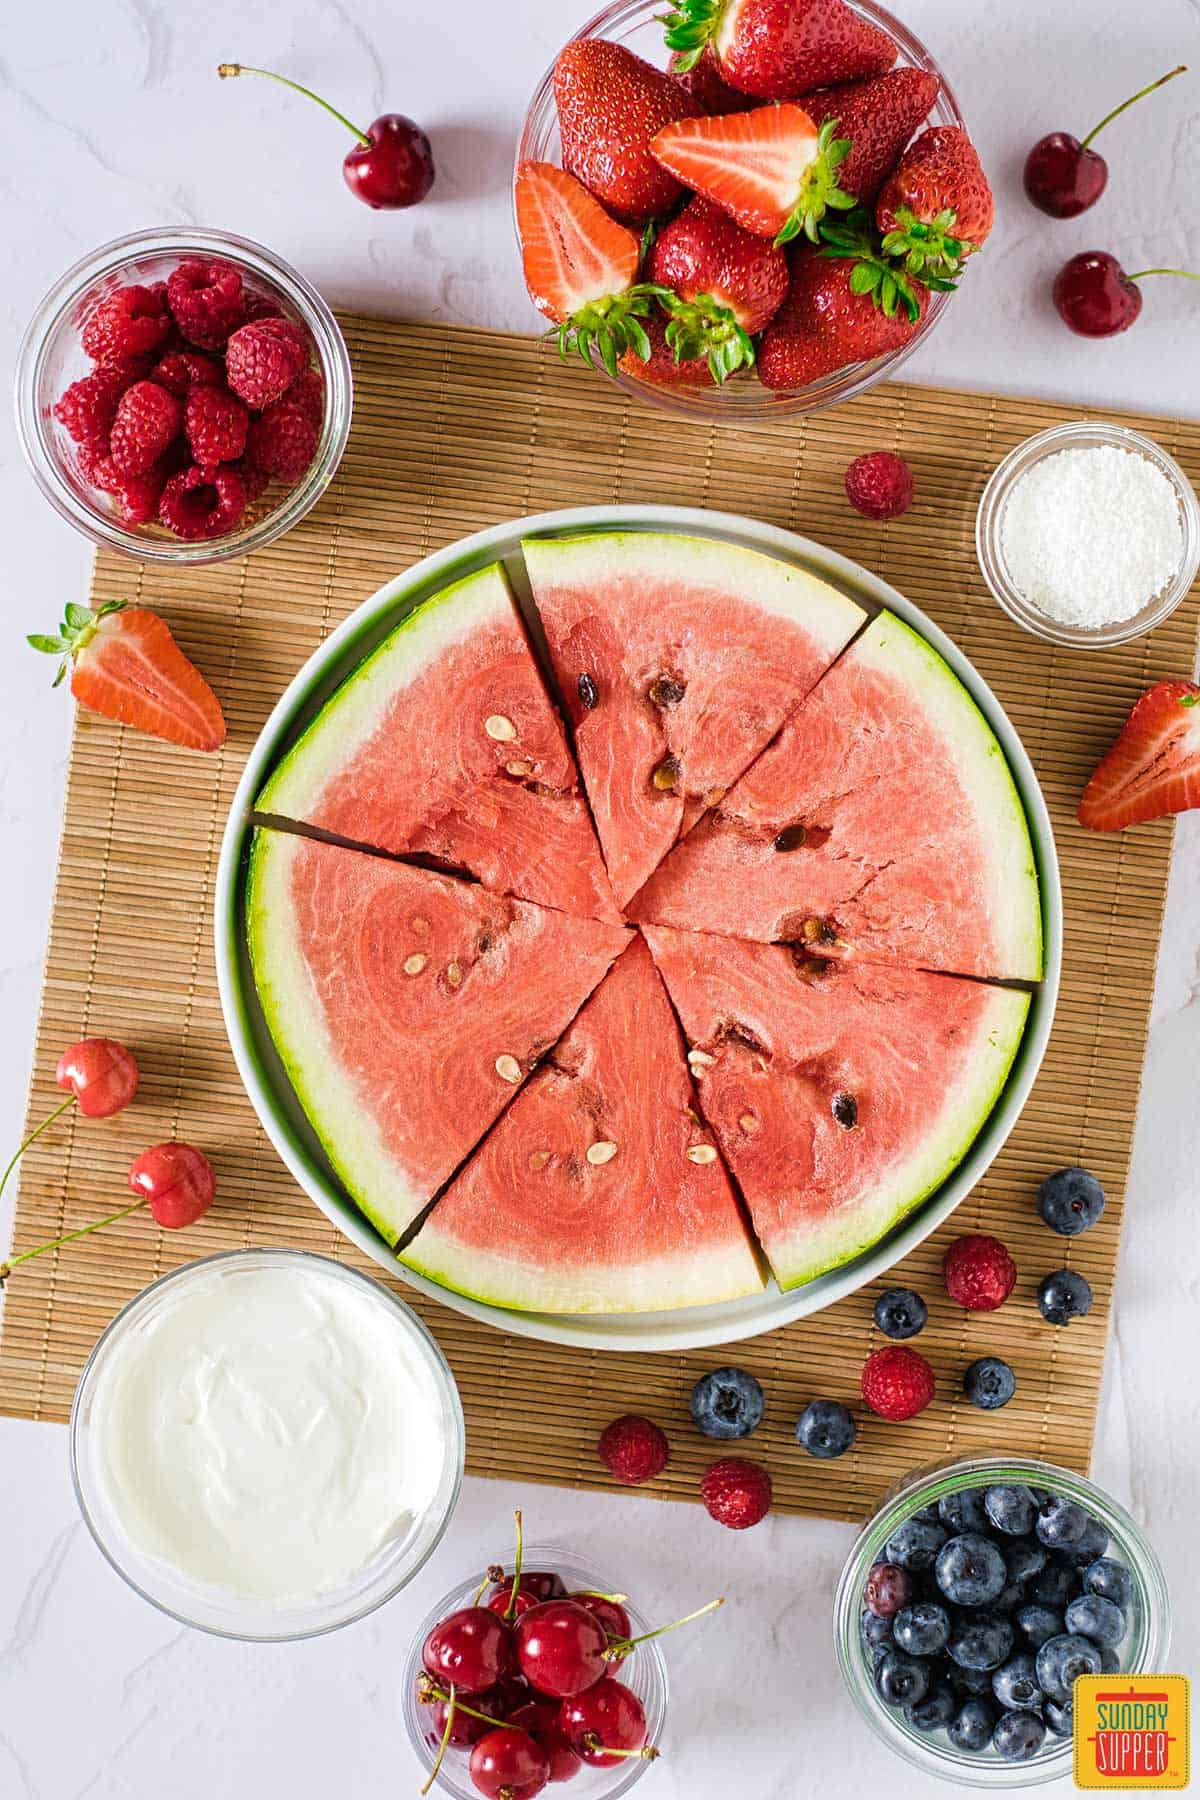 watermelon cut into slices next to a bowl of yogurt and fresh fruits